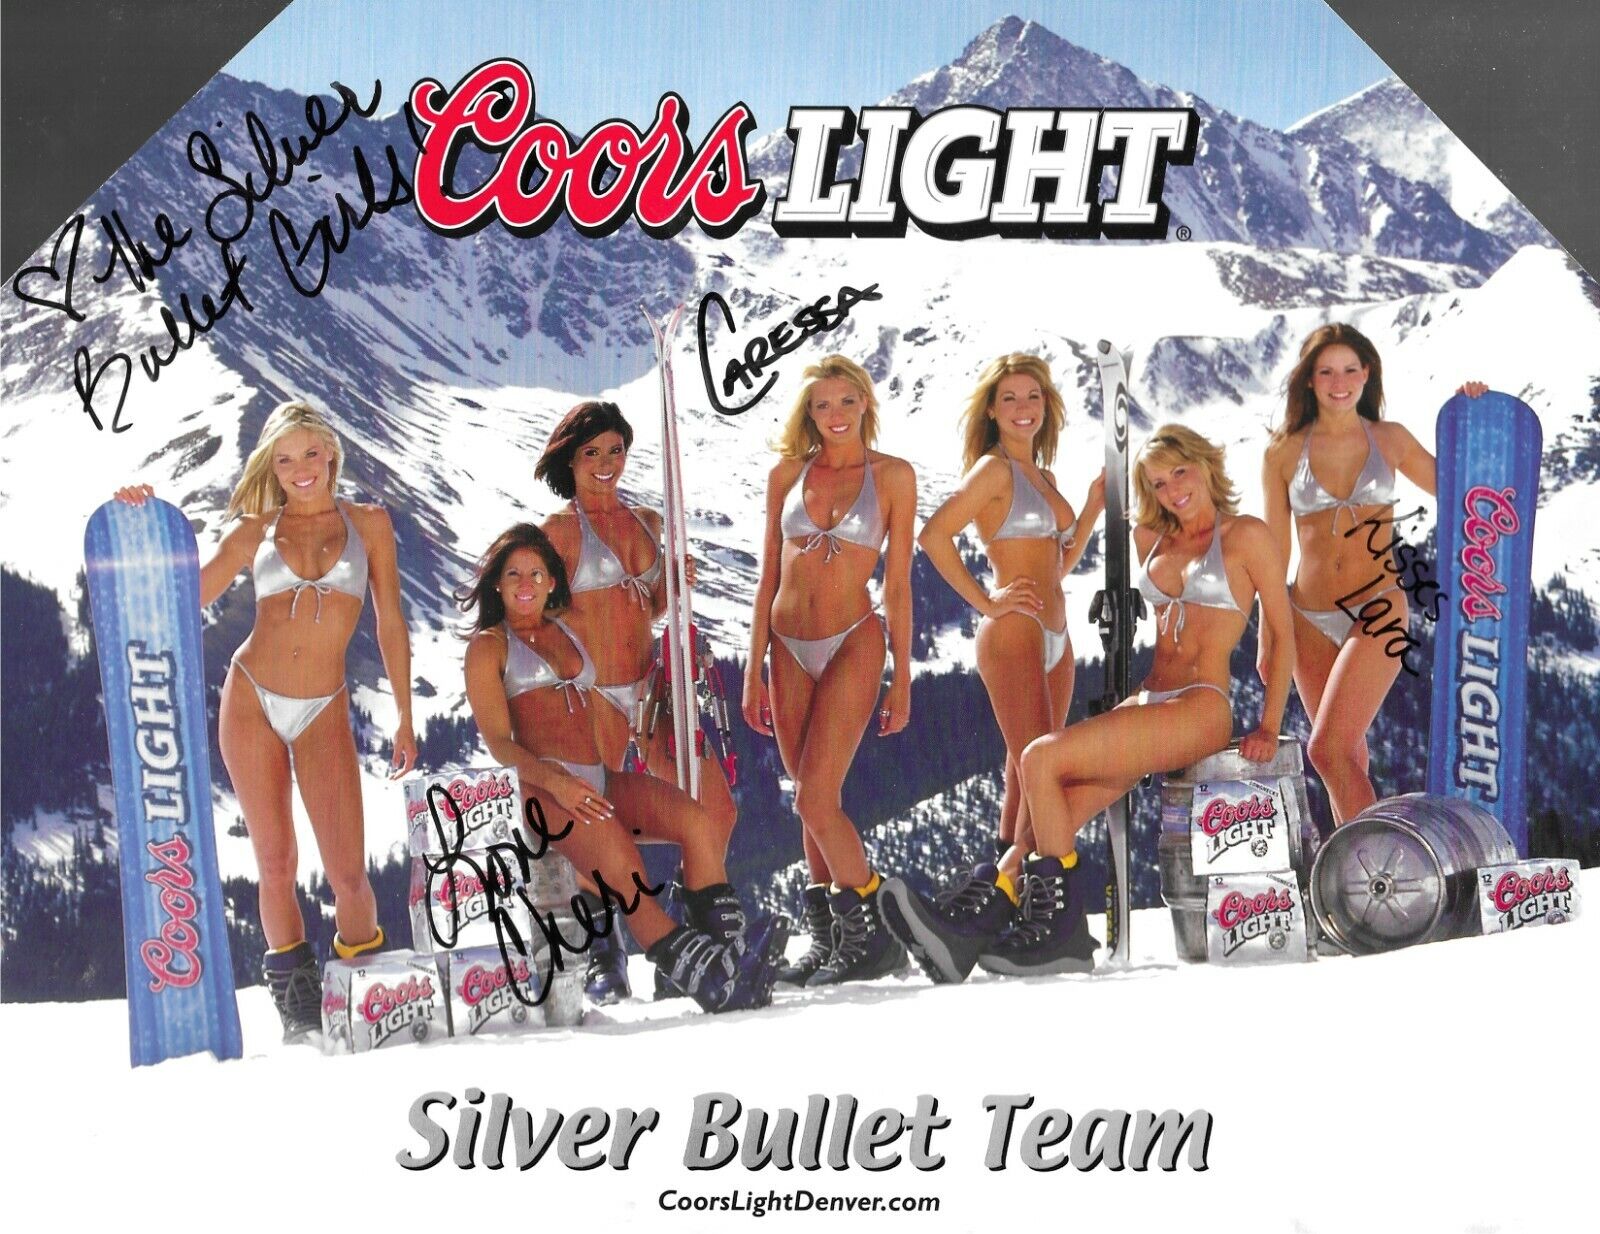 Coors Light Silver Bullet Team Photo 2 - No Date , Note The Top Corners